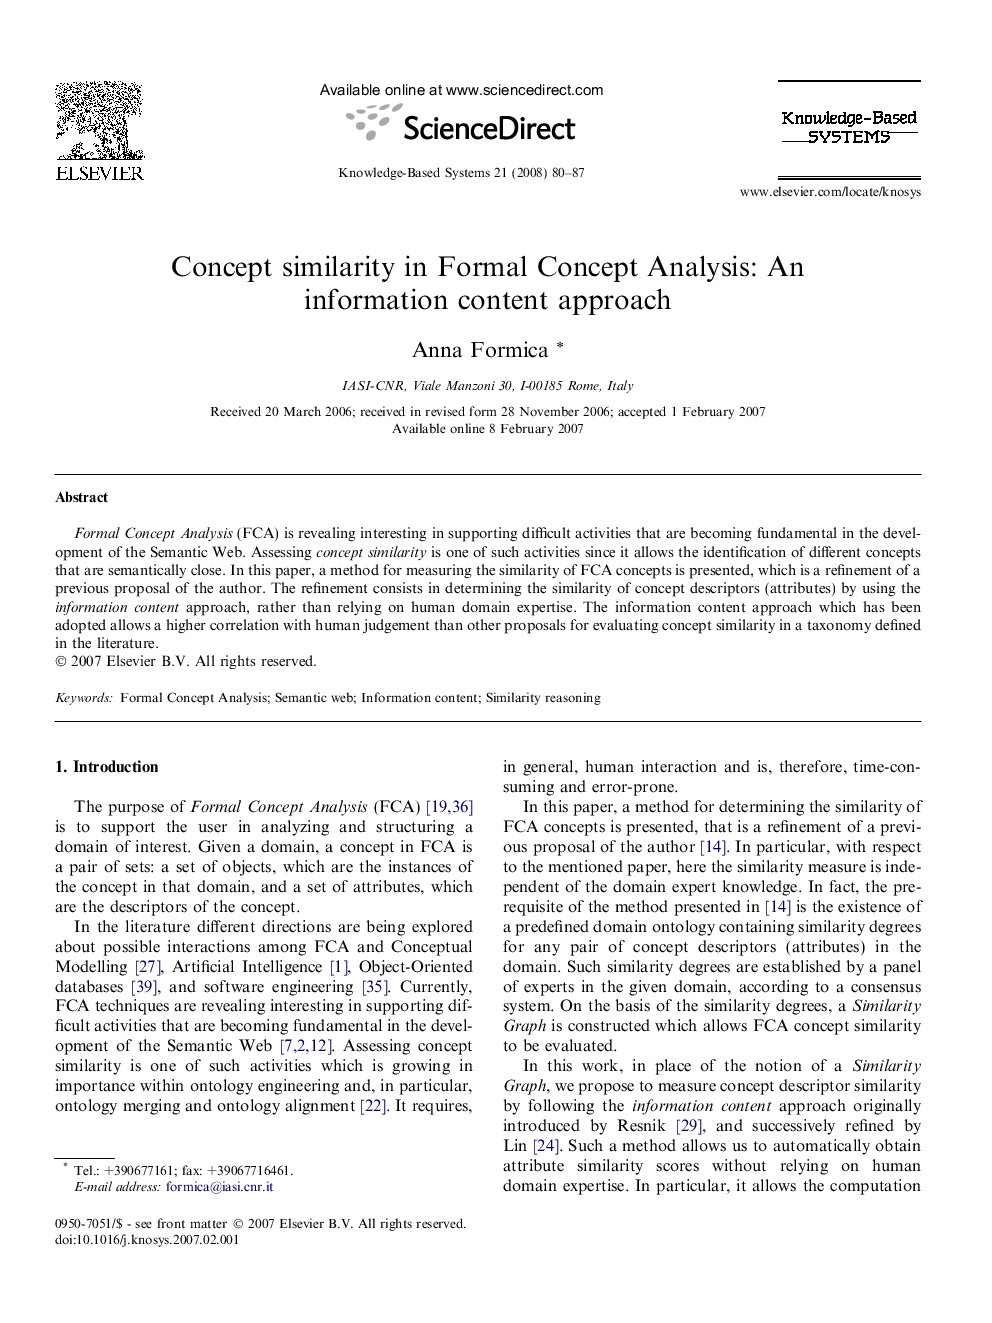 Concept similarity in Formal Concept Analysis: An information content approach